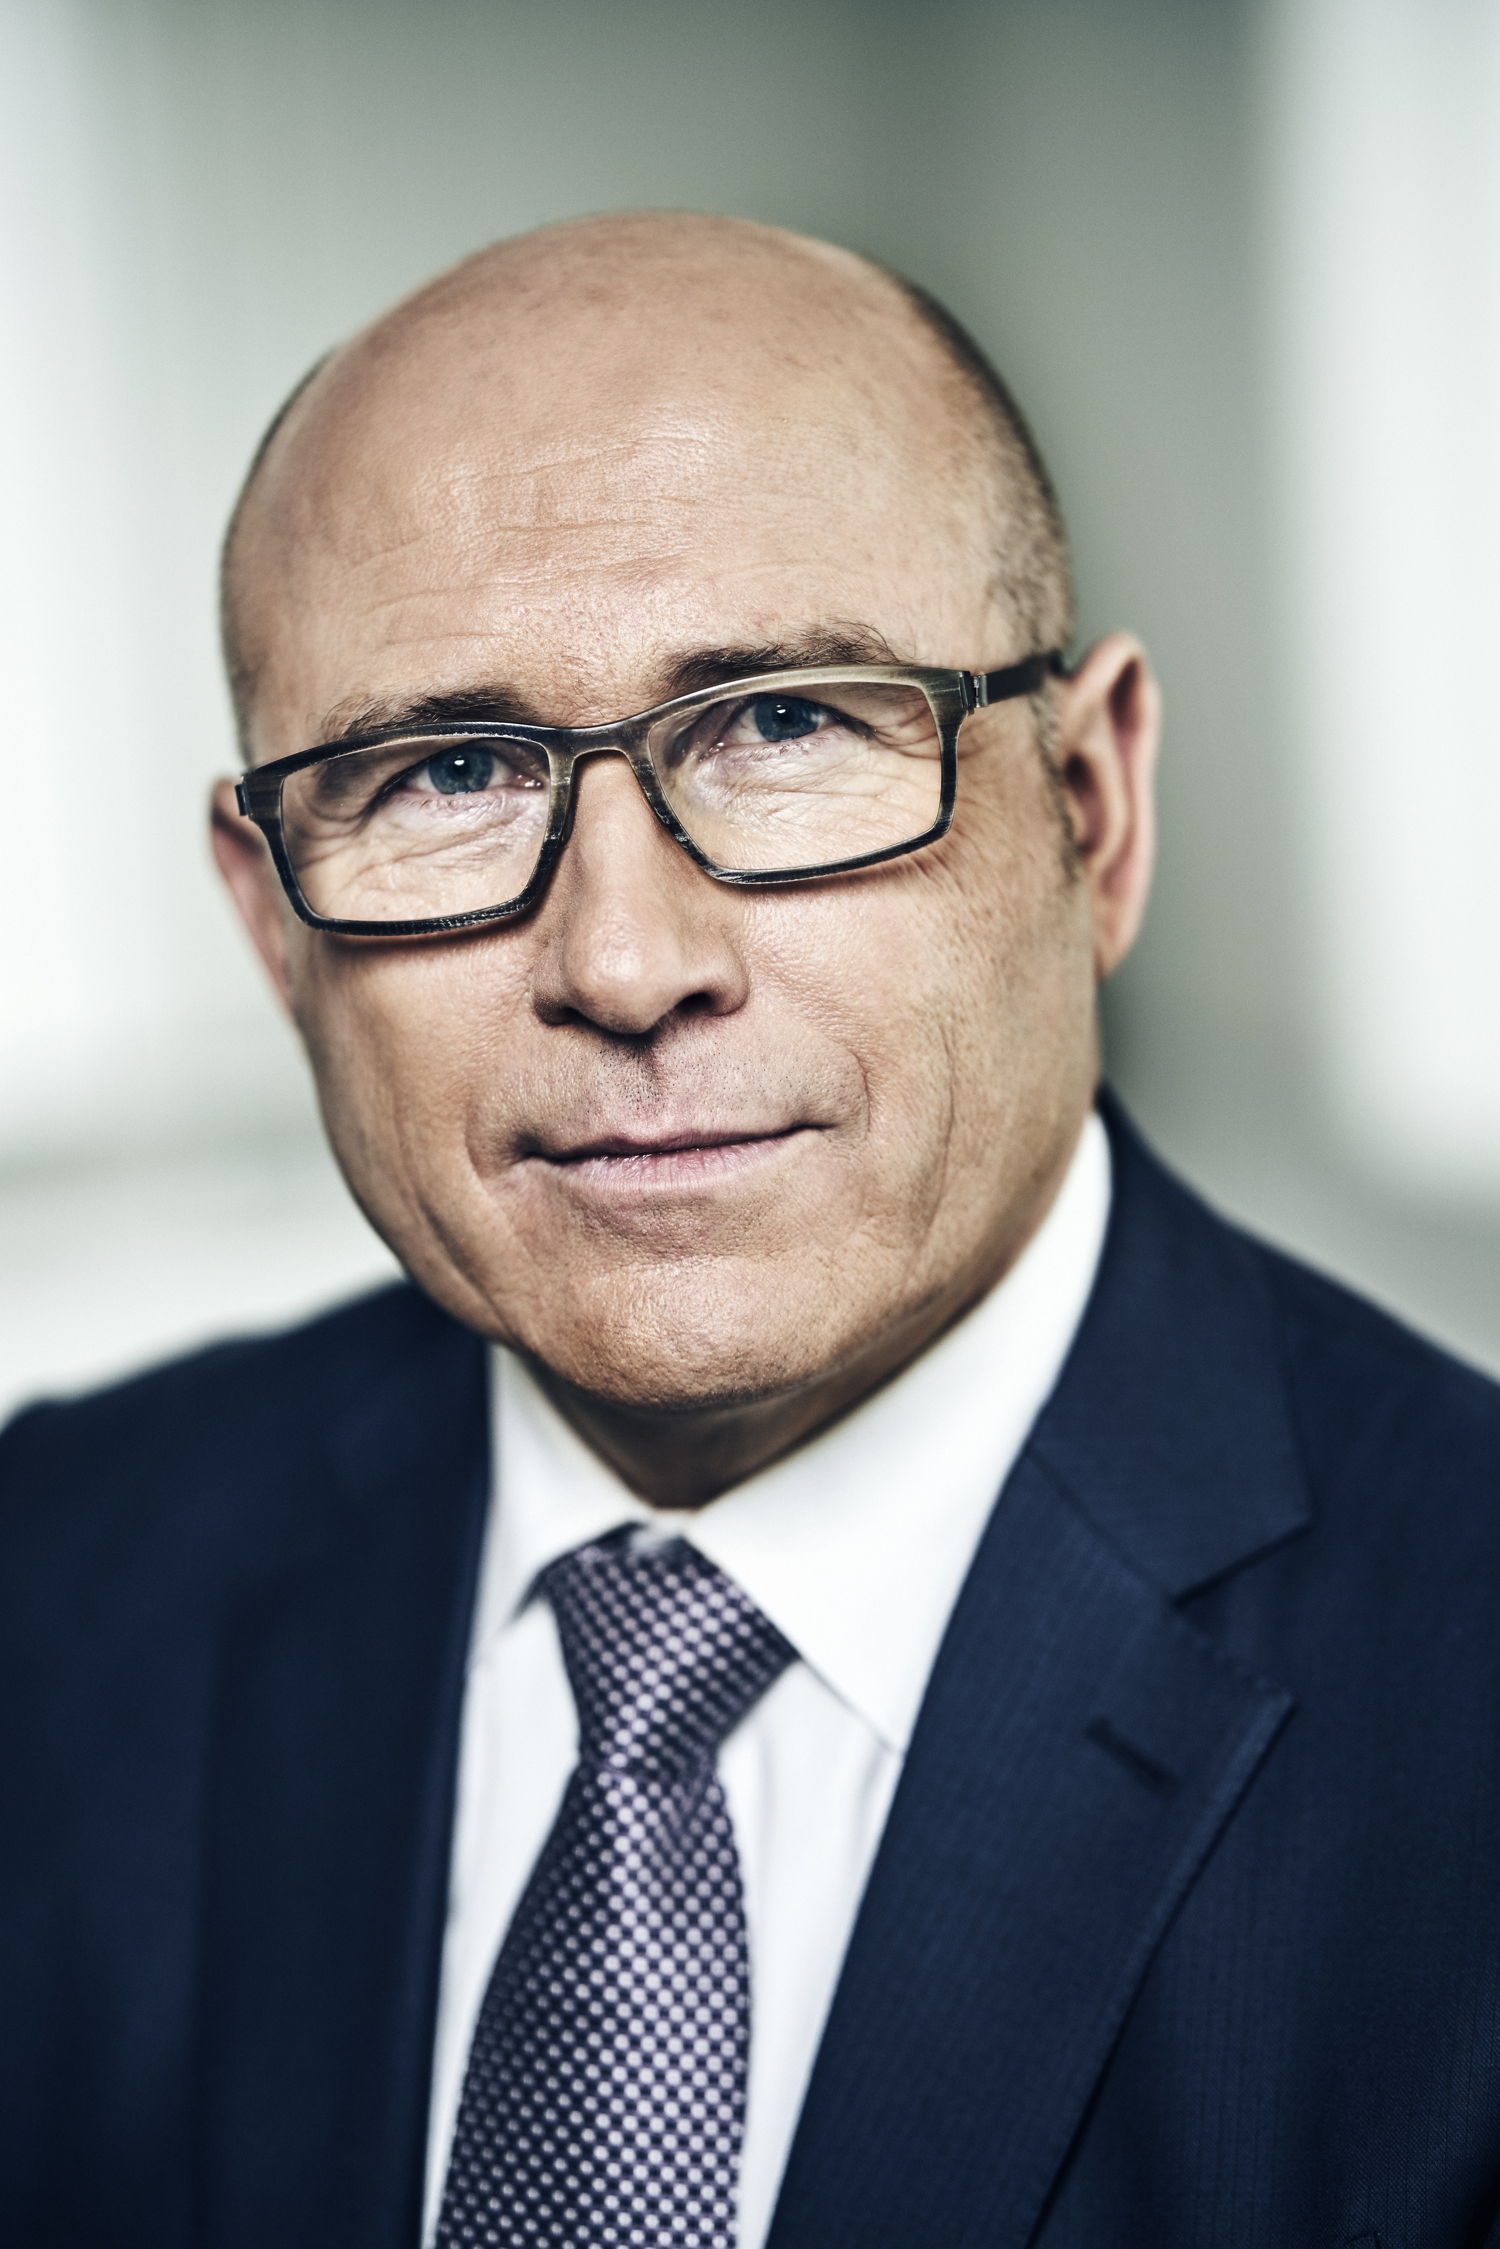 Bernhard Maier is stepping down as Chairman of the Board of Directors on 31.7.2020 after almost five years of leading ŠKODA AUTO.